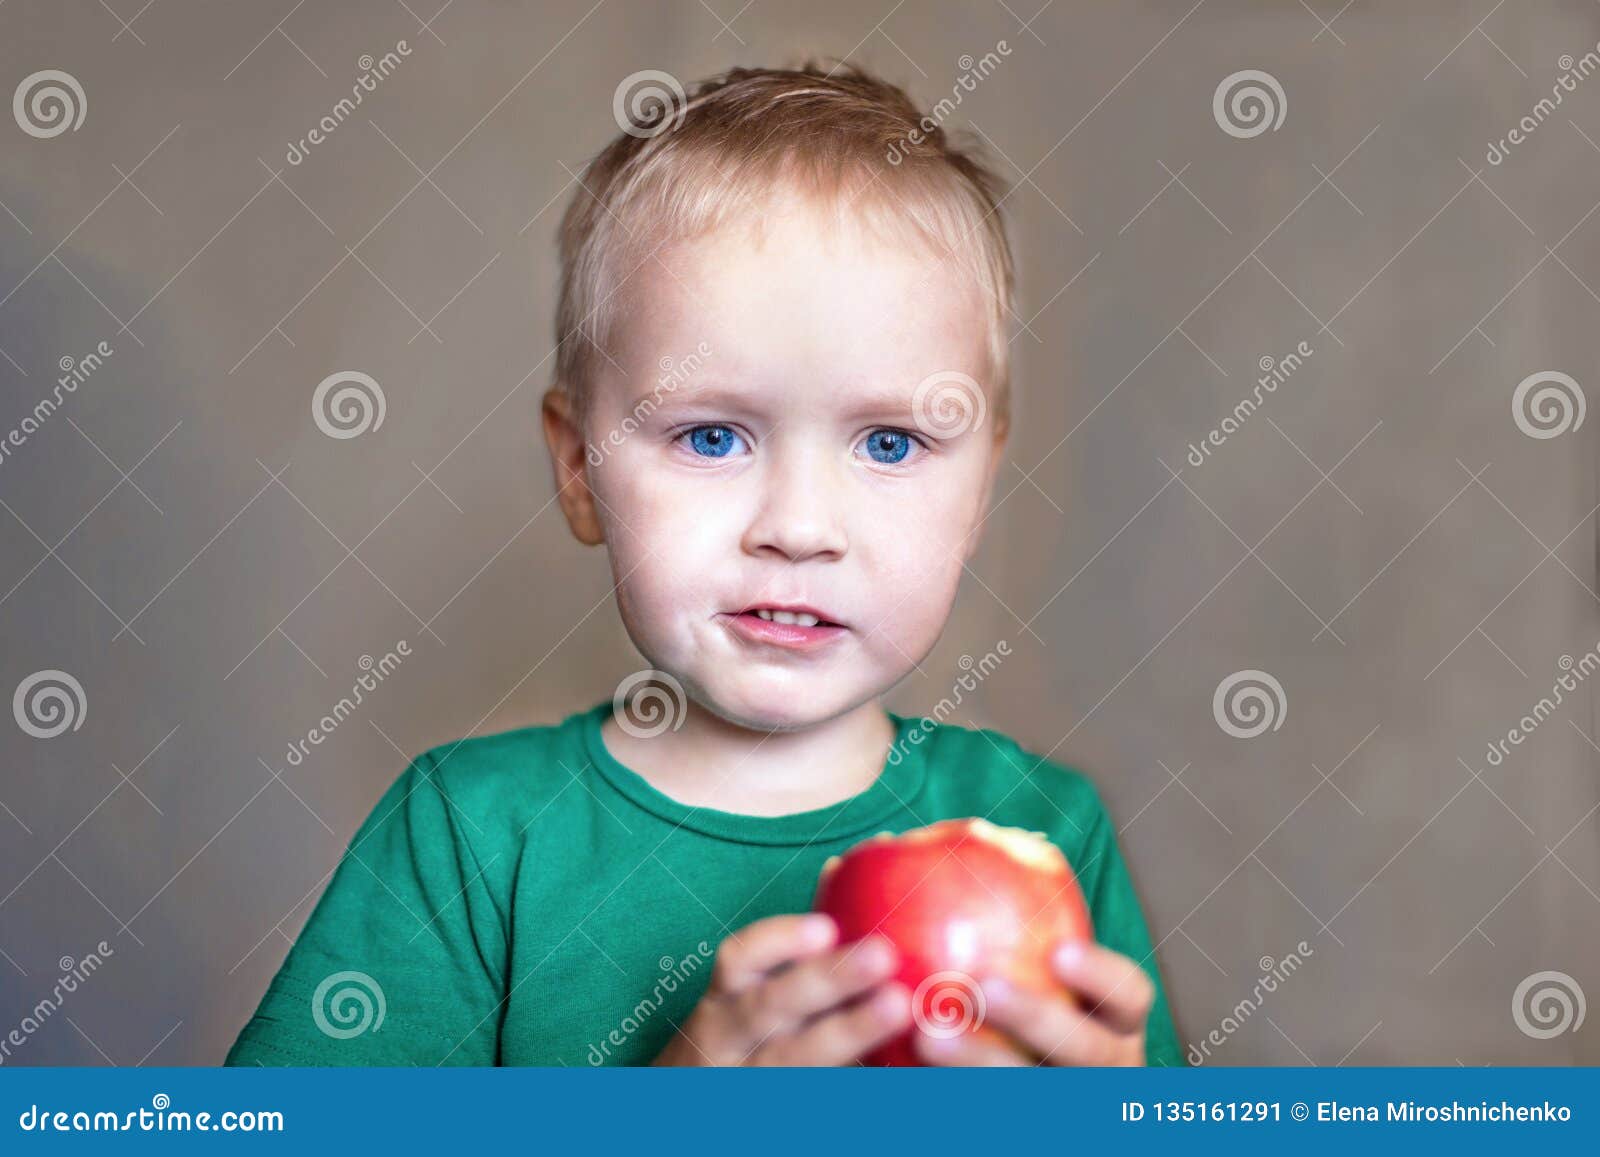 Cute Caucasian Baby Boy With Blue Eyes And Blonde Hair In Green T